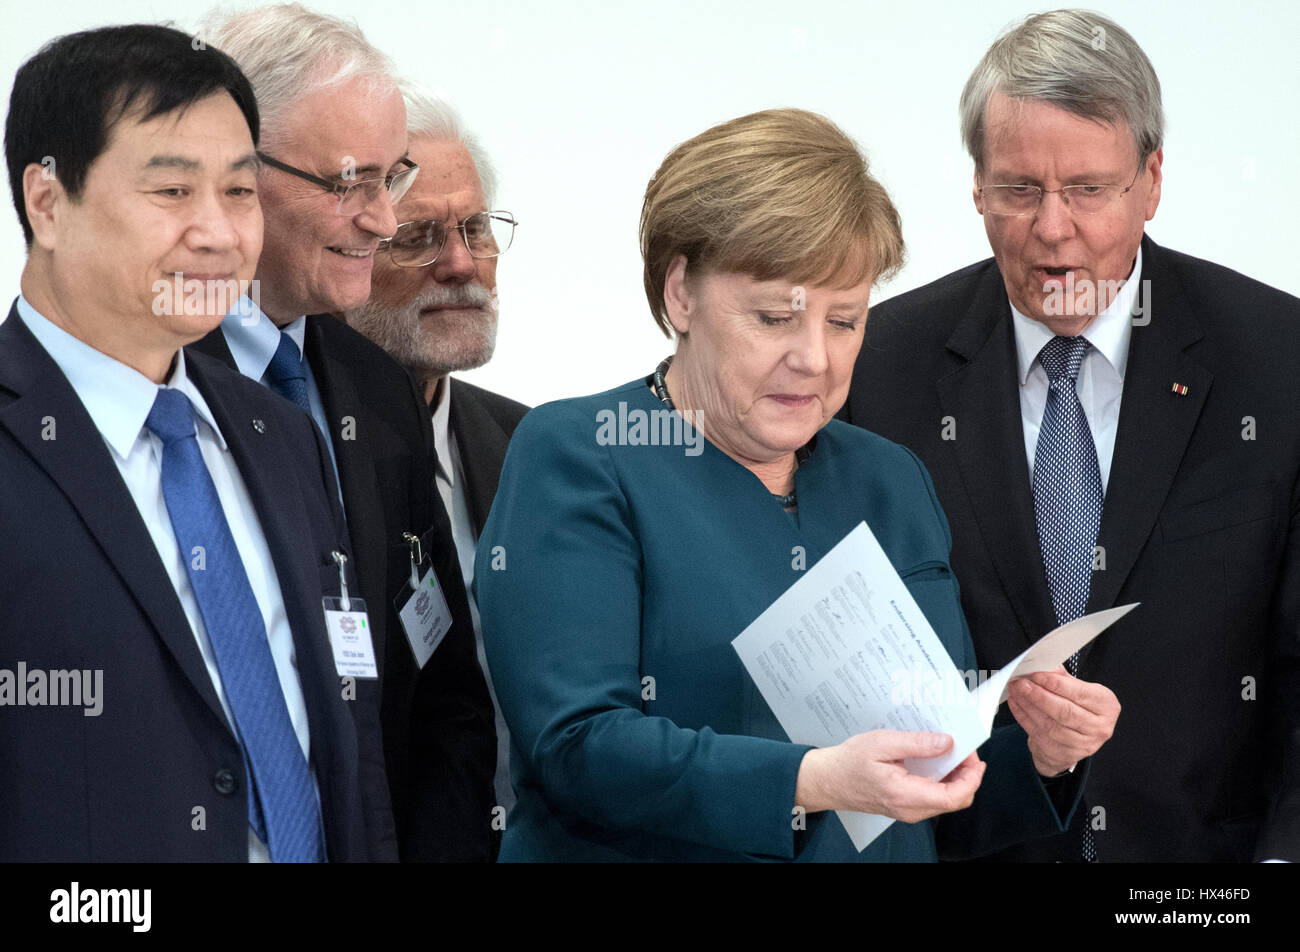 German Chancellor Angela Merkel (2nd from R), accompanied by various academics, is presented with a paper by the president of National Academy of Sciences, Leopoldina, Joerg Hacker (R) in Halle (Saale), Germany, 22 March 2017. The German head of government is taking recommendations from international scientists. Under the leadership of the Leopoldina academy, the national science academies of the 20 largest industrial and developing countries (G20) submitted recommendations for improvement of global health provision. Photo: Hendrik Schmidt/dpa-Zentralbild/dpa Stock Photo